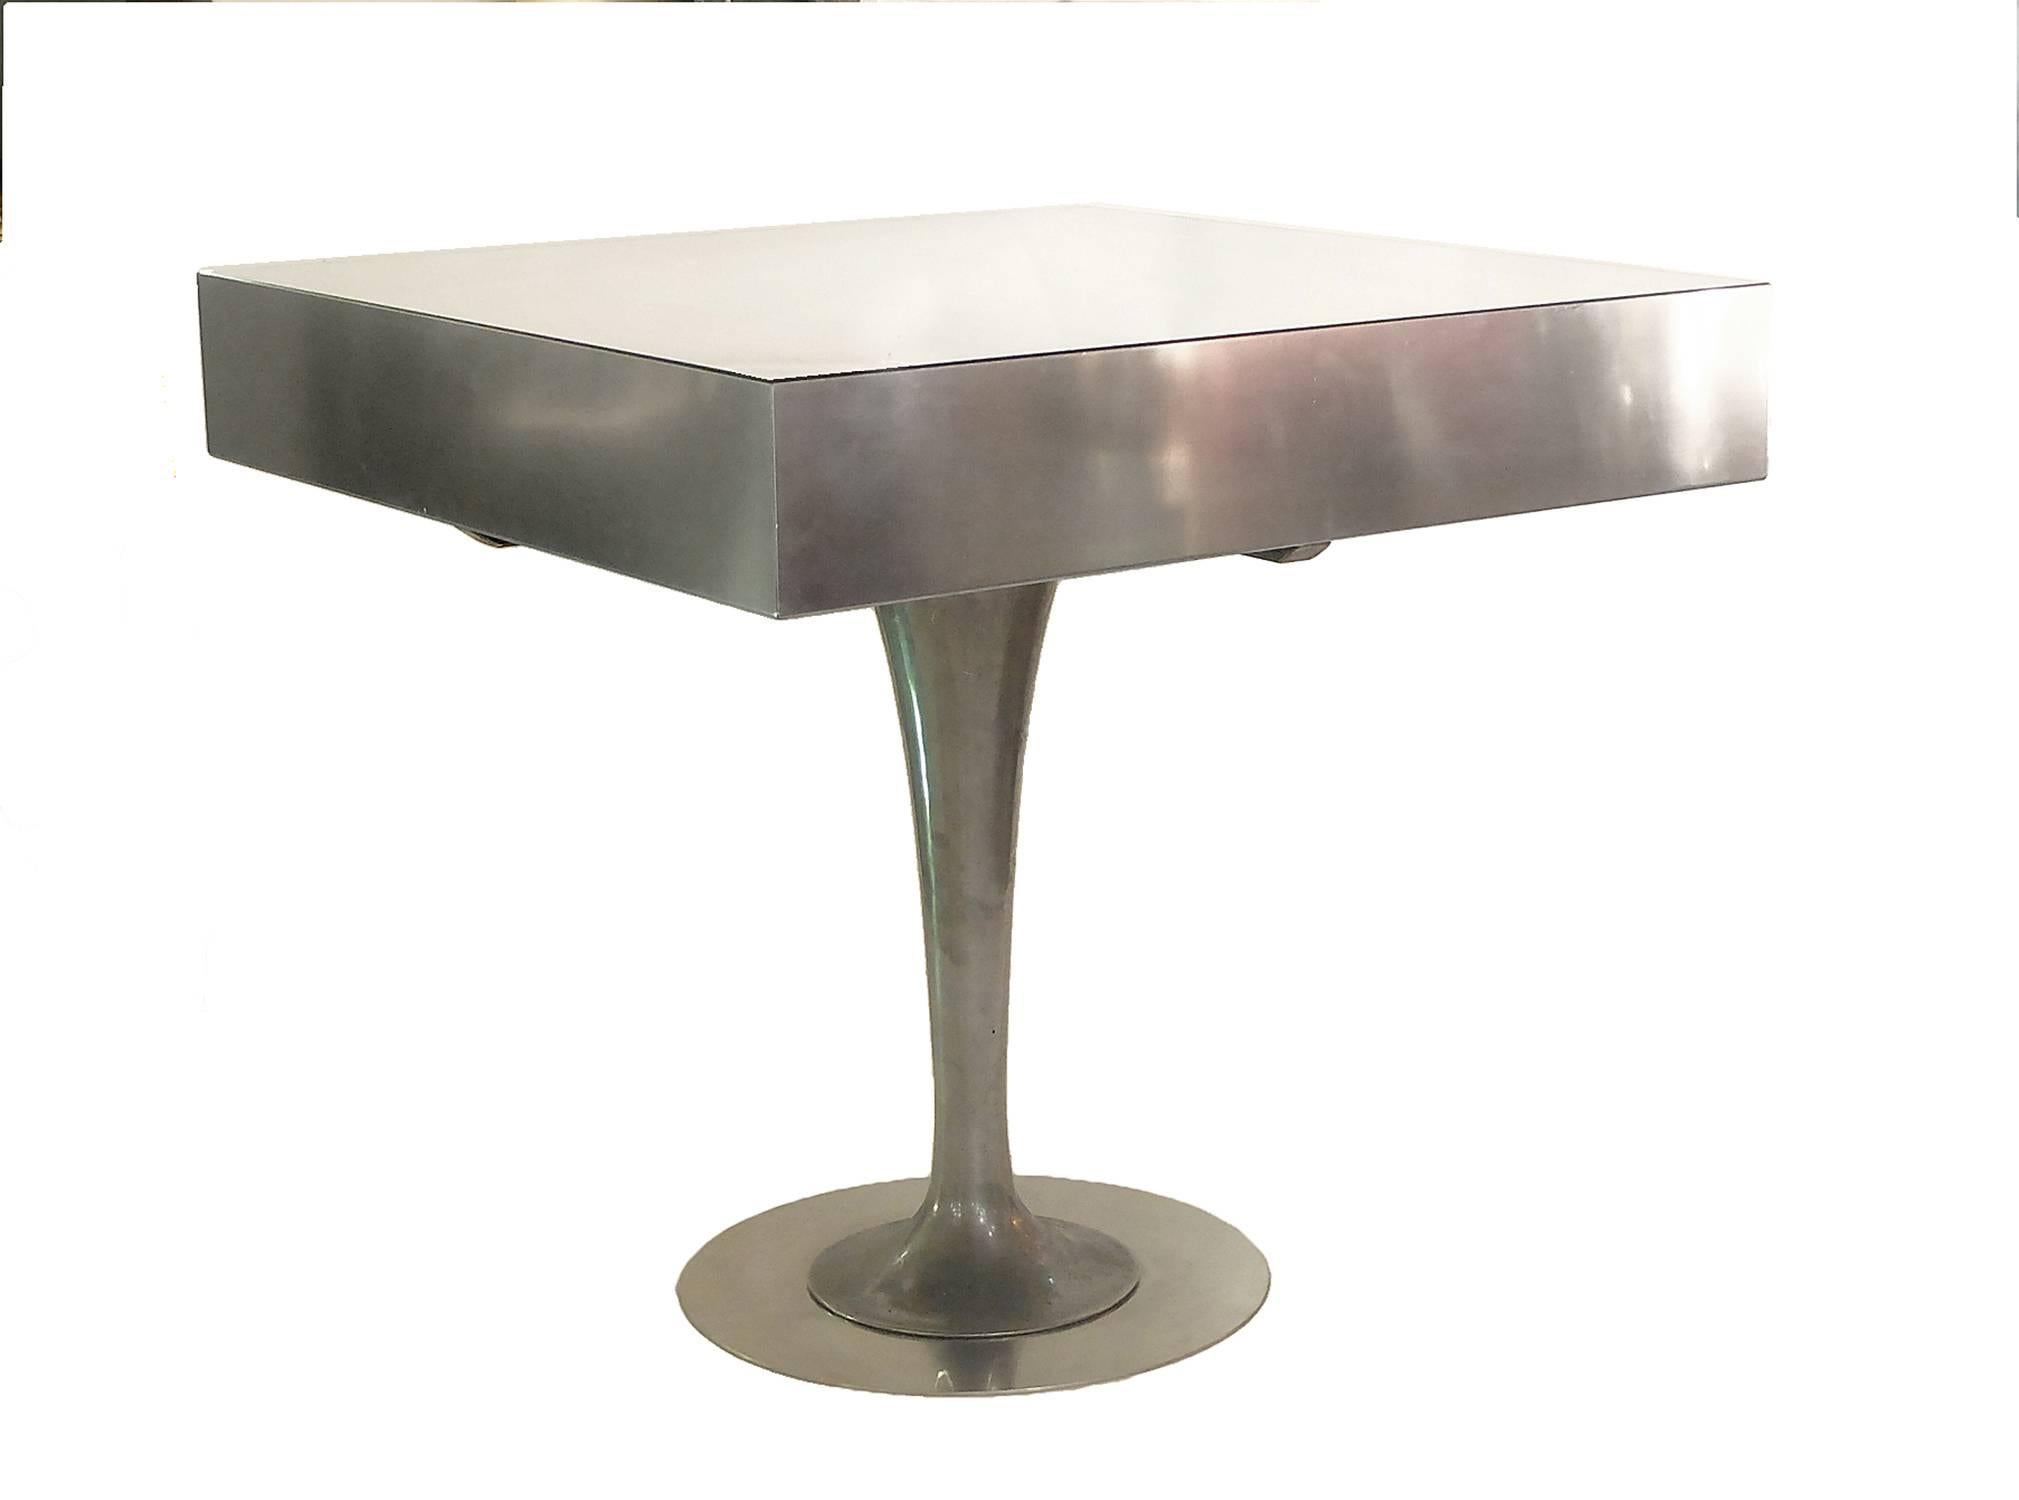 The leg, made out of aluminum, is in the purest American Art Deco.
The round base rise and opens wide to the top. The top is made out of a juxtaposition of cardboard elements, boxed inside an aluminum frame, with a glass top.
The entire top is the